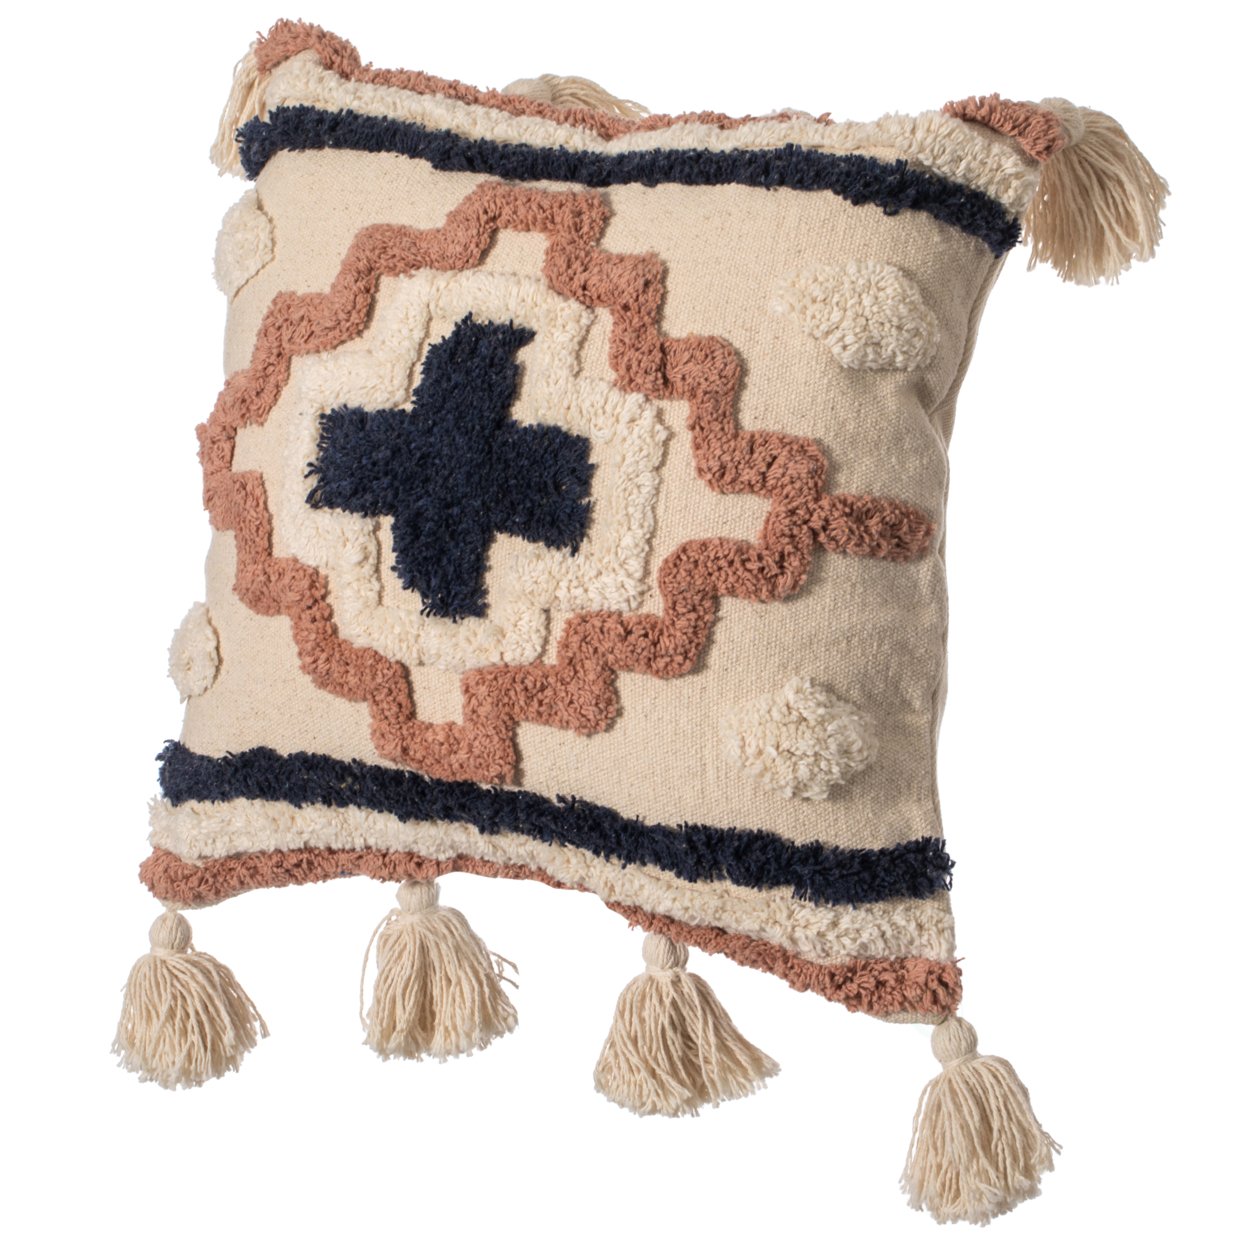 16 Handwoven Cotton Throw Pillow Cover With Tufted Designs And Side Tassels - Tribal